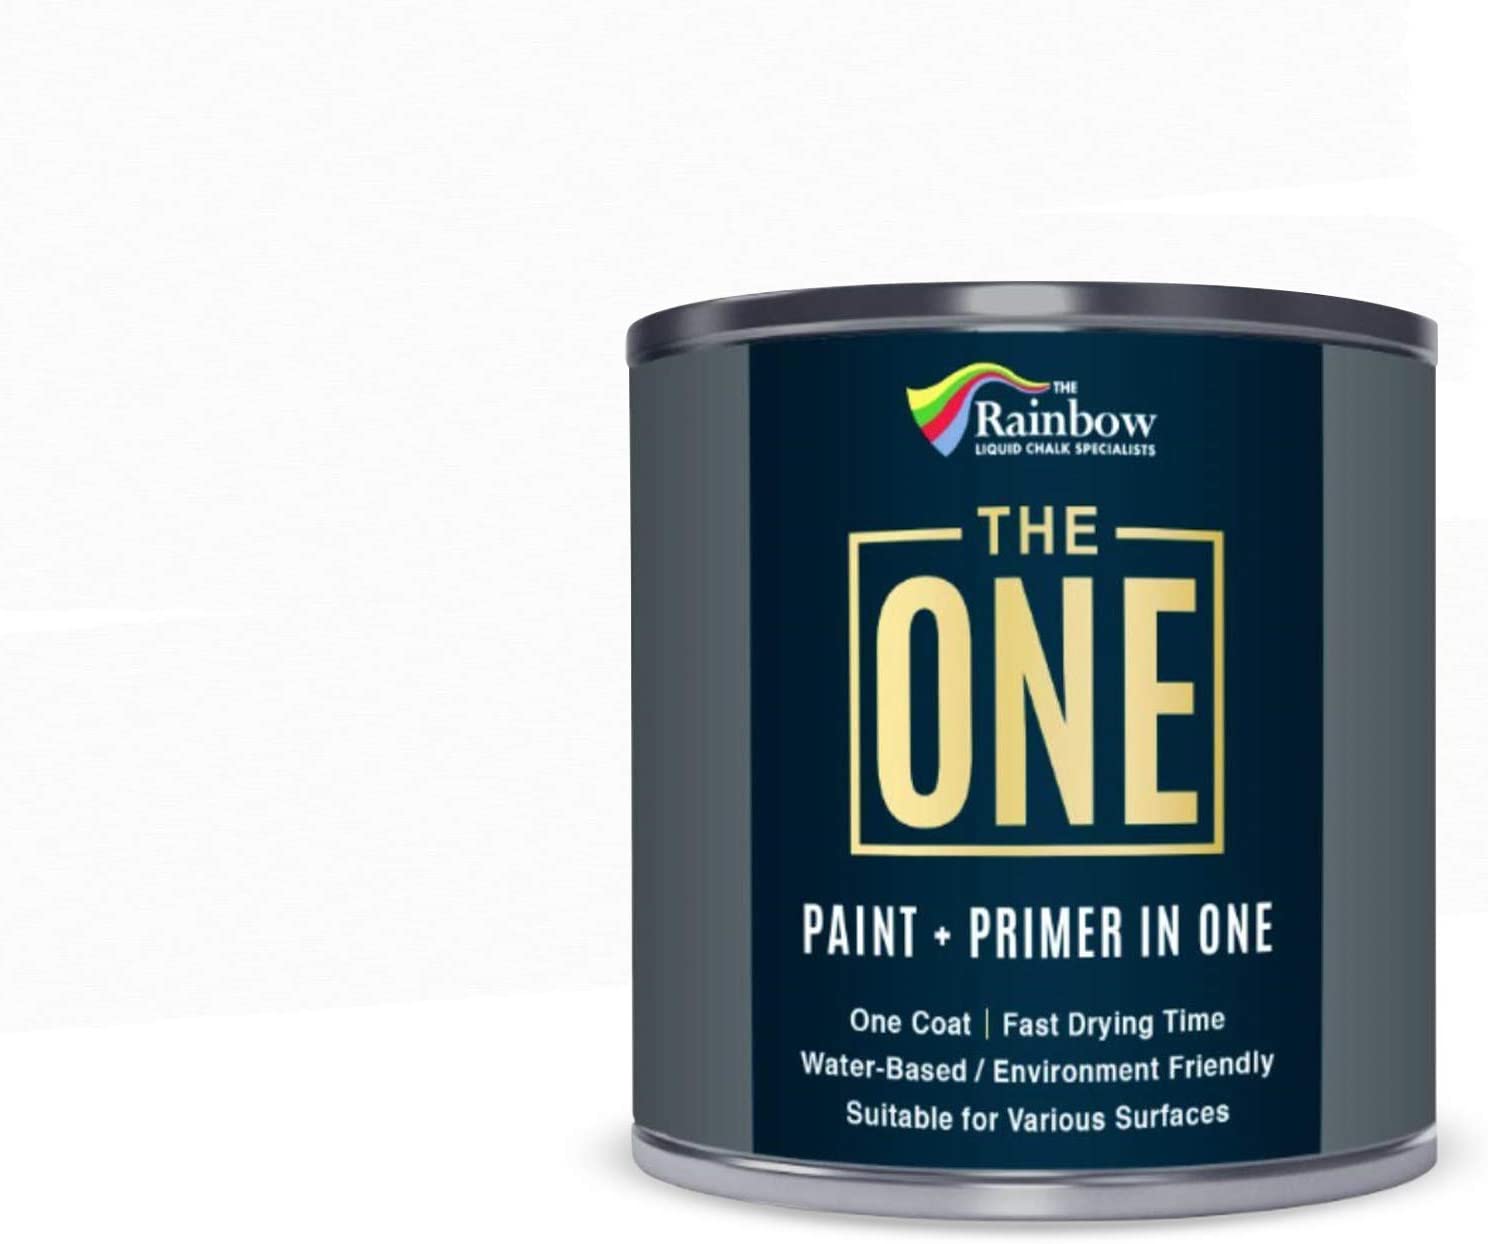 THE ONE Paint & Primer: Most Durable Furniture Paint, [...]